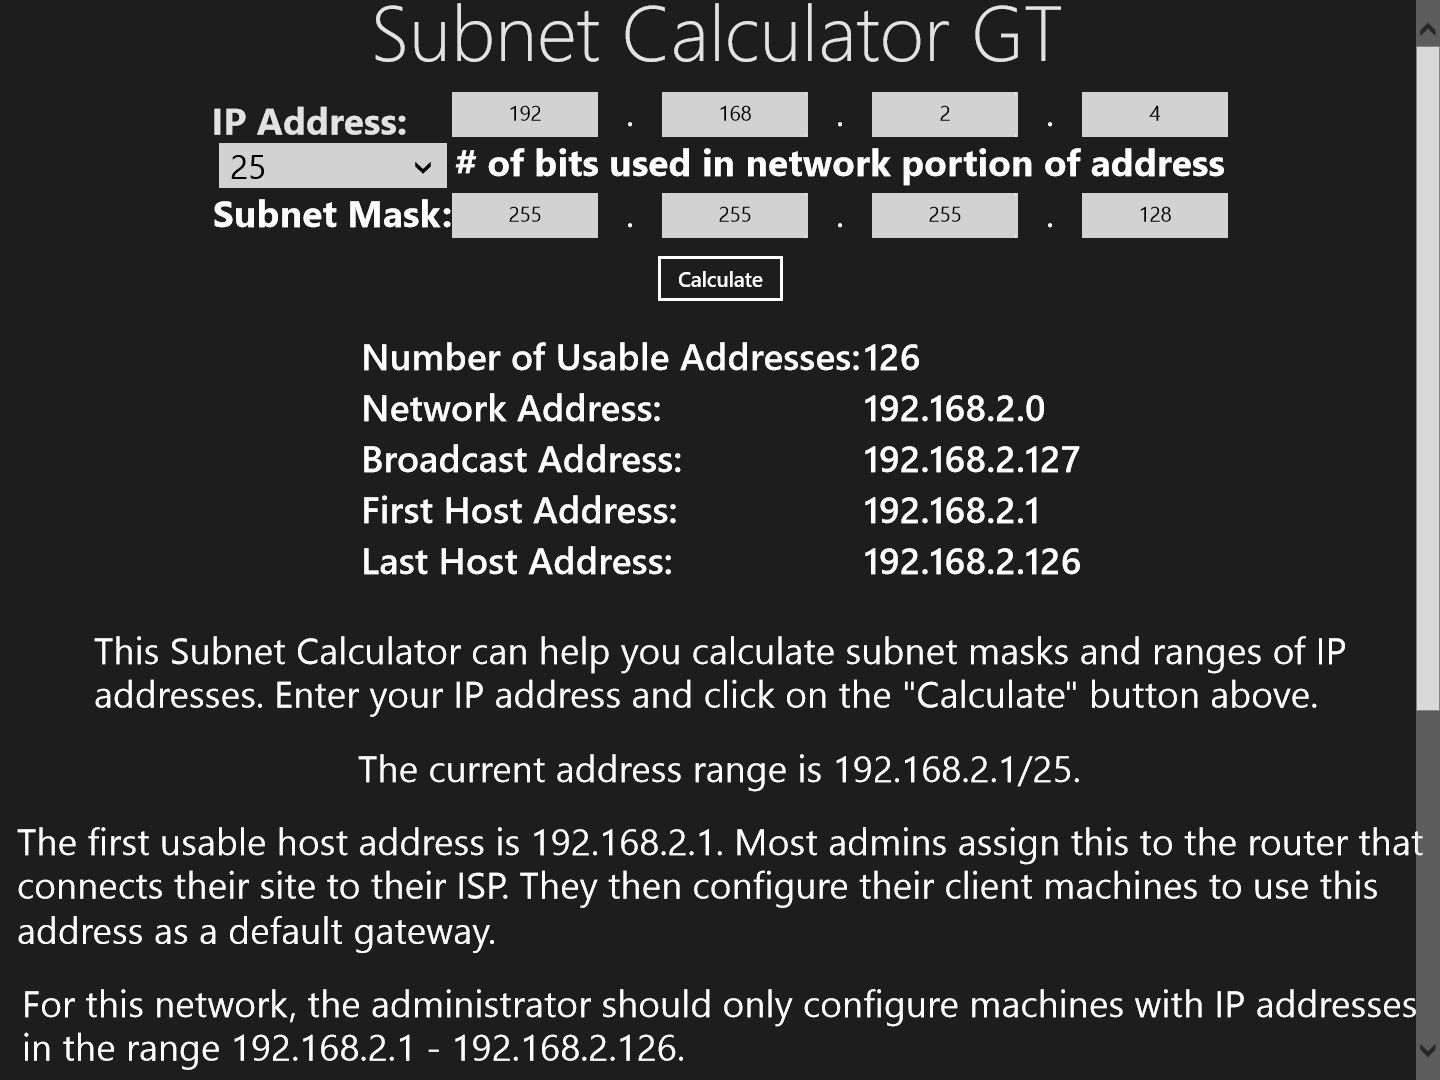 Easily calculate subnet masks and number of usable addresses.